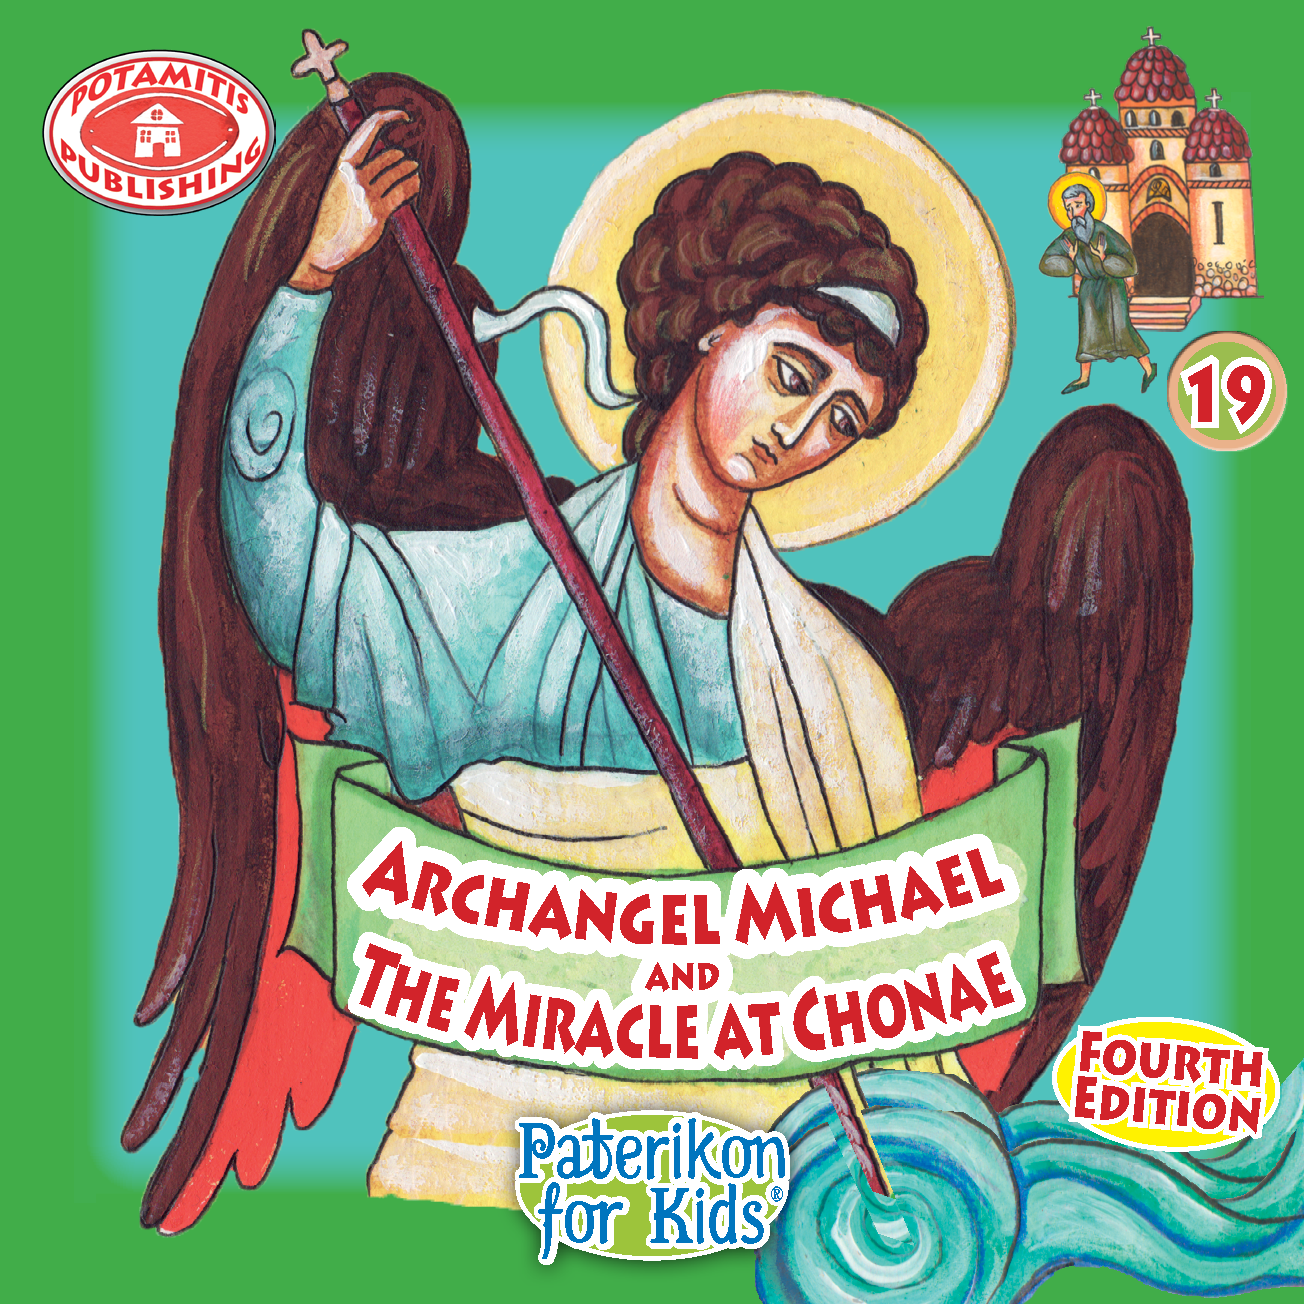 019 PFK: The Miracle of the Archangel